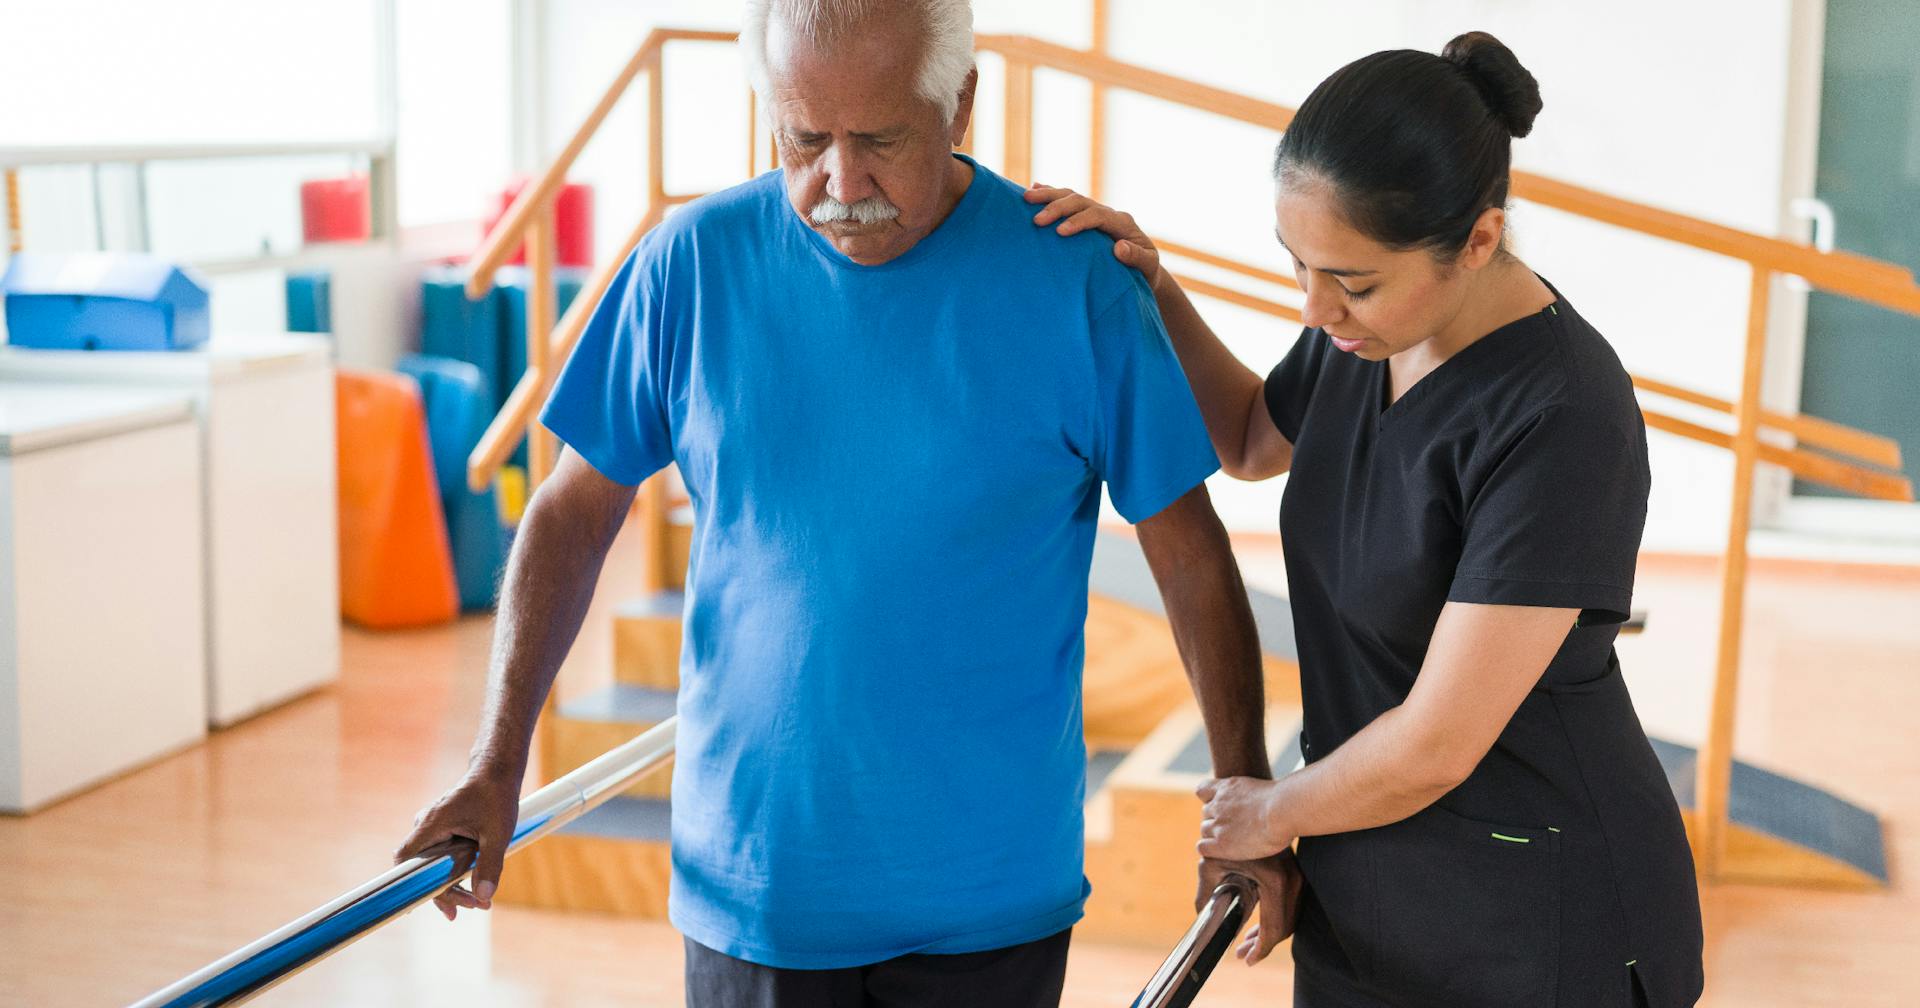 A physical therapist helps an older man with a walking exercise.